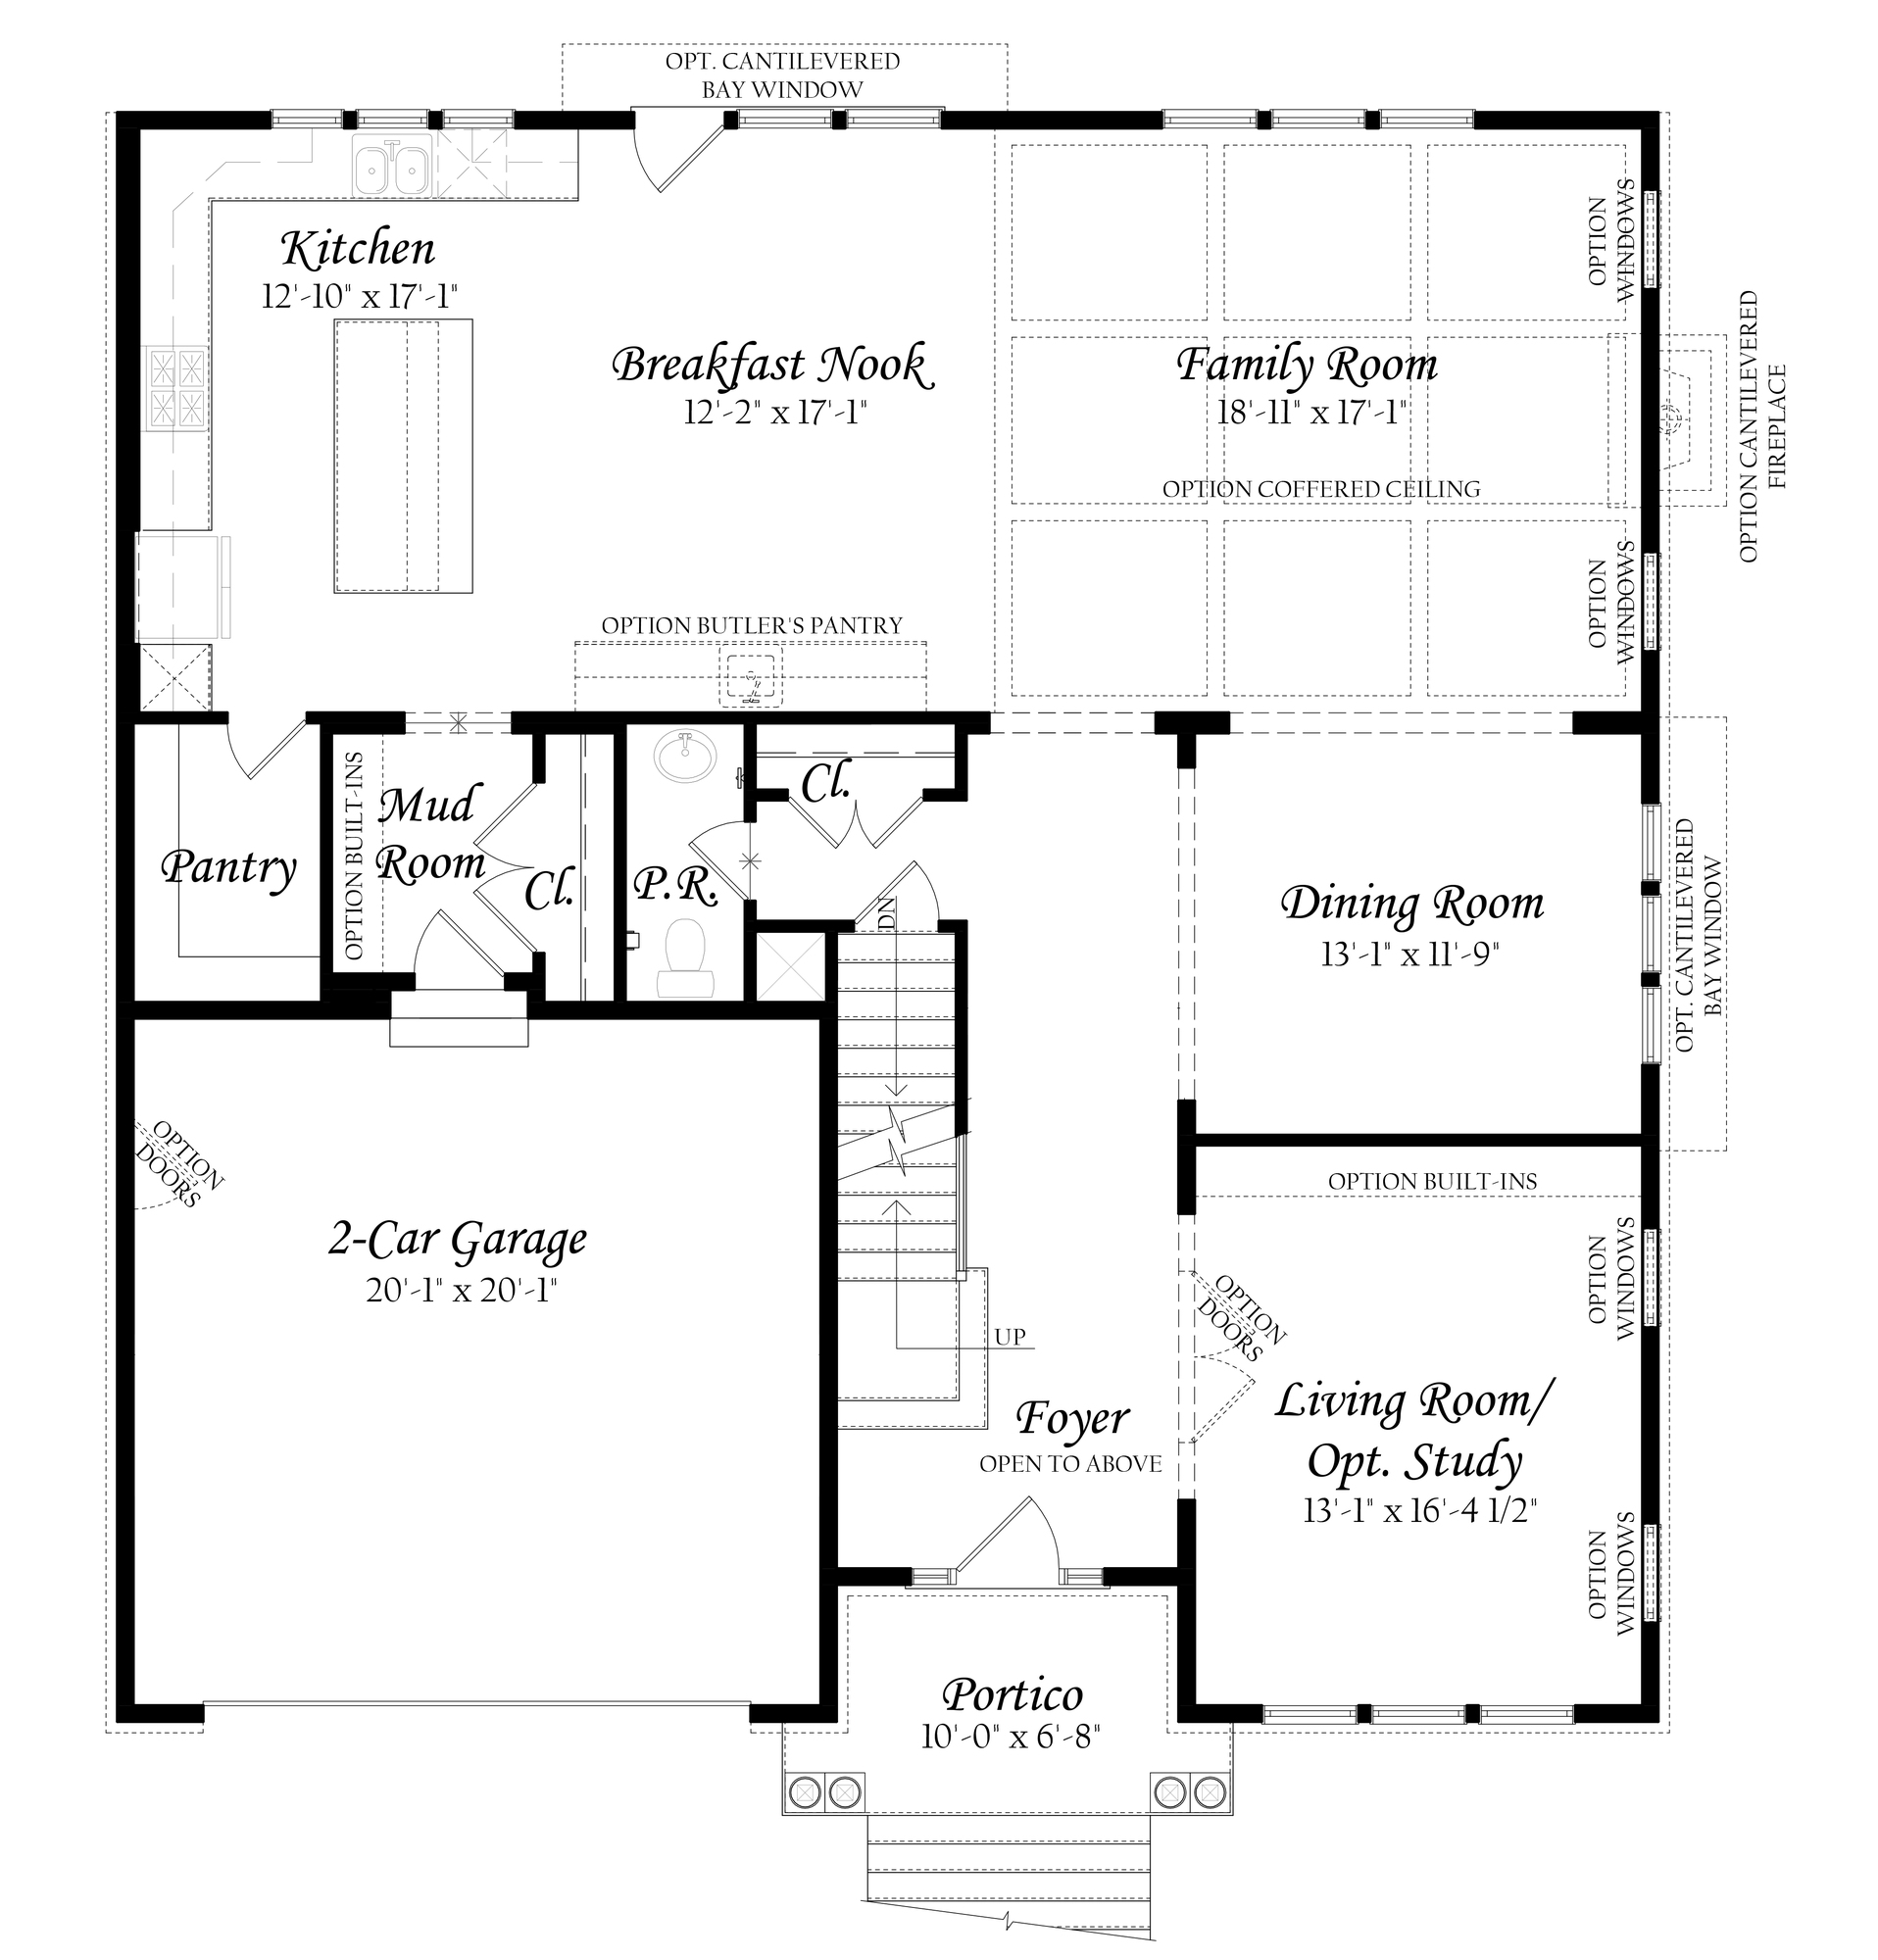 Second Floor and Options